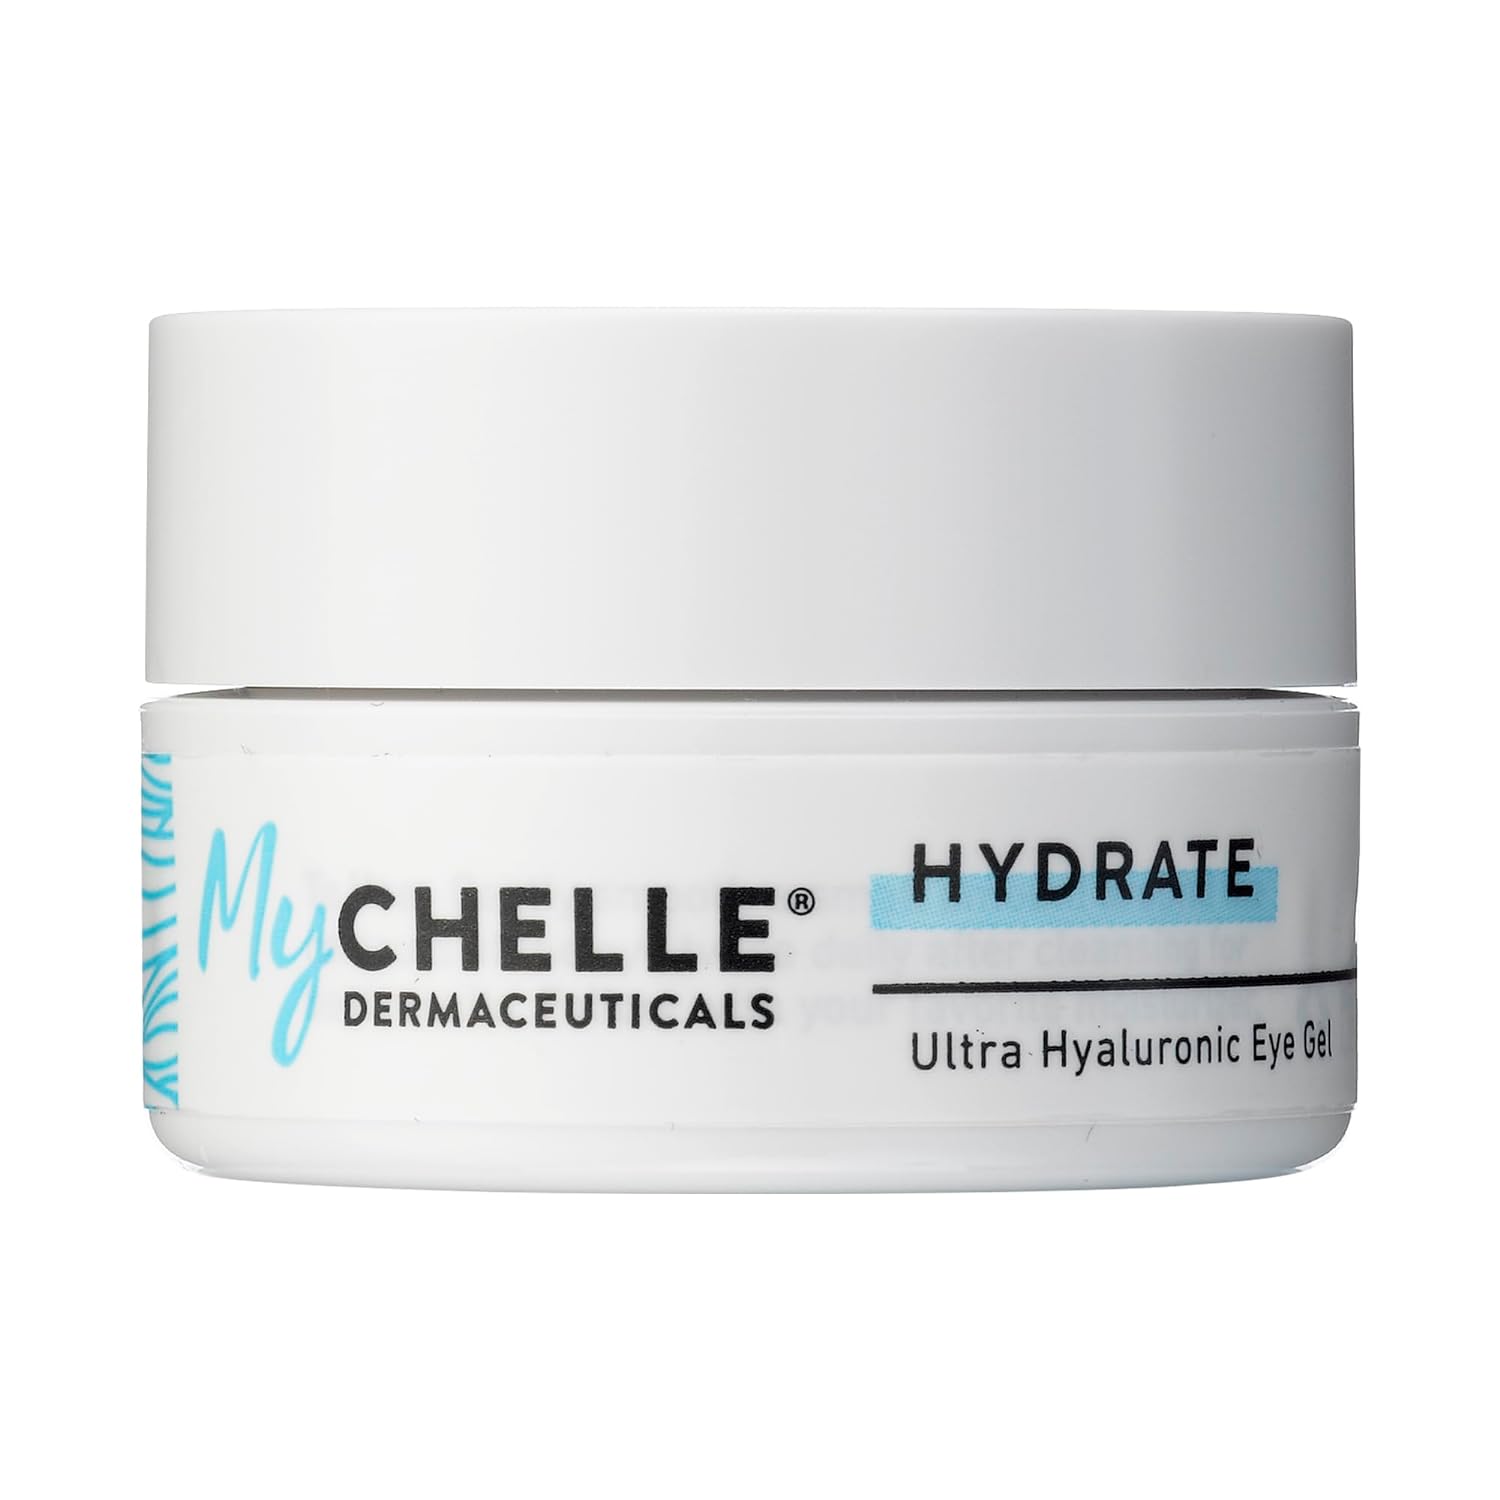 MyChelle Dermaceuticals Ultra Hyaluronic Eye Gel (0.45 Fl Oz) - Rich Hydration for Dry Skin with Vegan Hyaluronic Acid, Help Plump Skin and Help Reduce Appearance of Fine Lines and Wrinkles